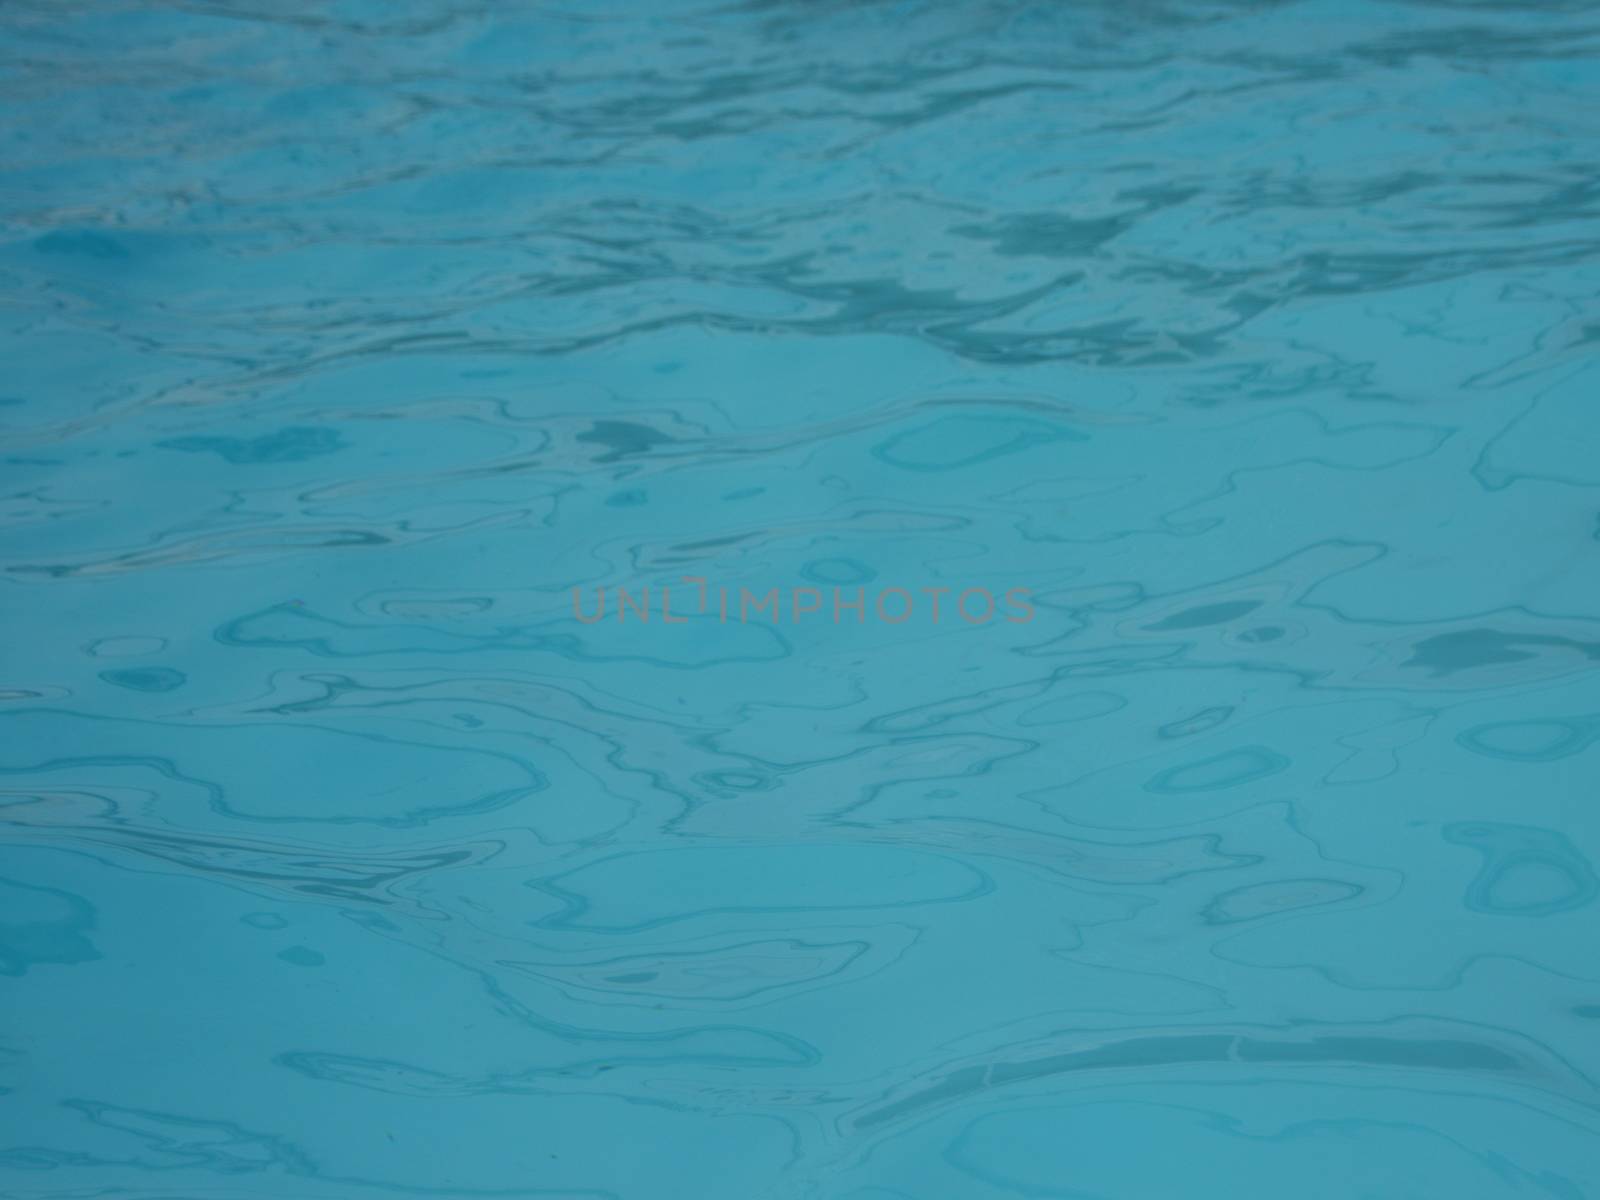 Blue Water Tranquil Abstract from Soft Swimming Pool Waves